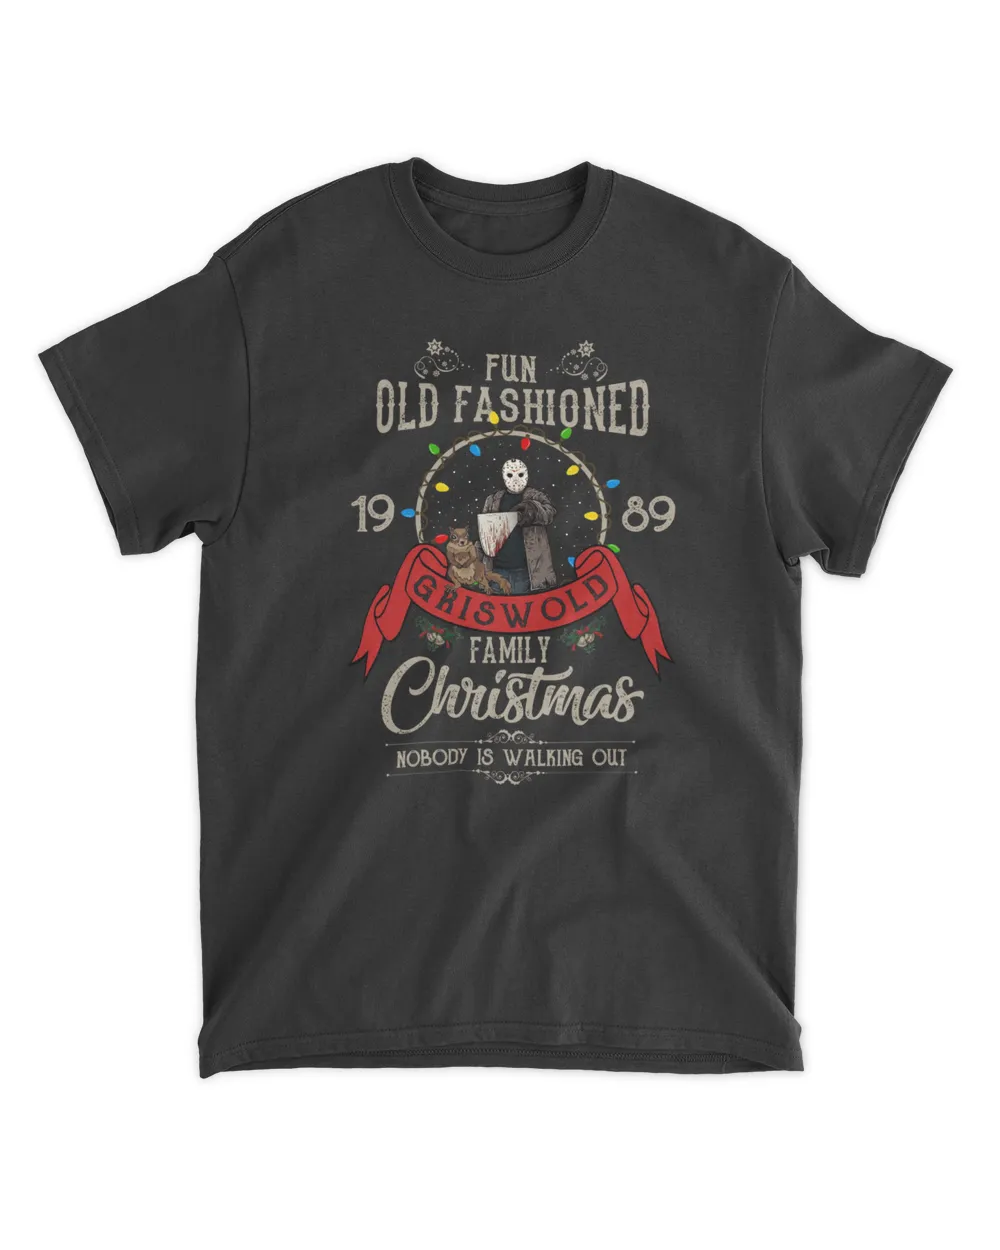 RD Griswold Fun Old Fashioned Family Christmas Shirt, Retro Vintage National Lampoon's Christmas Vacation 80s Gift Funny Squirrel Horror